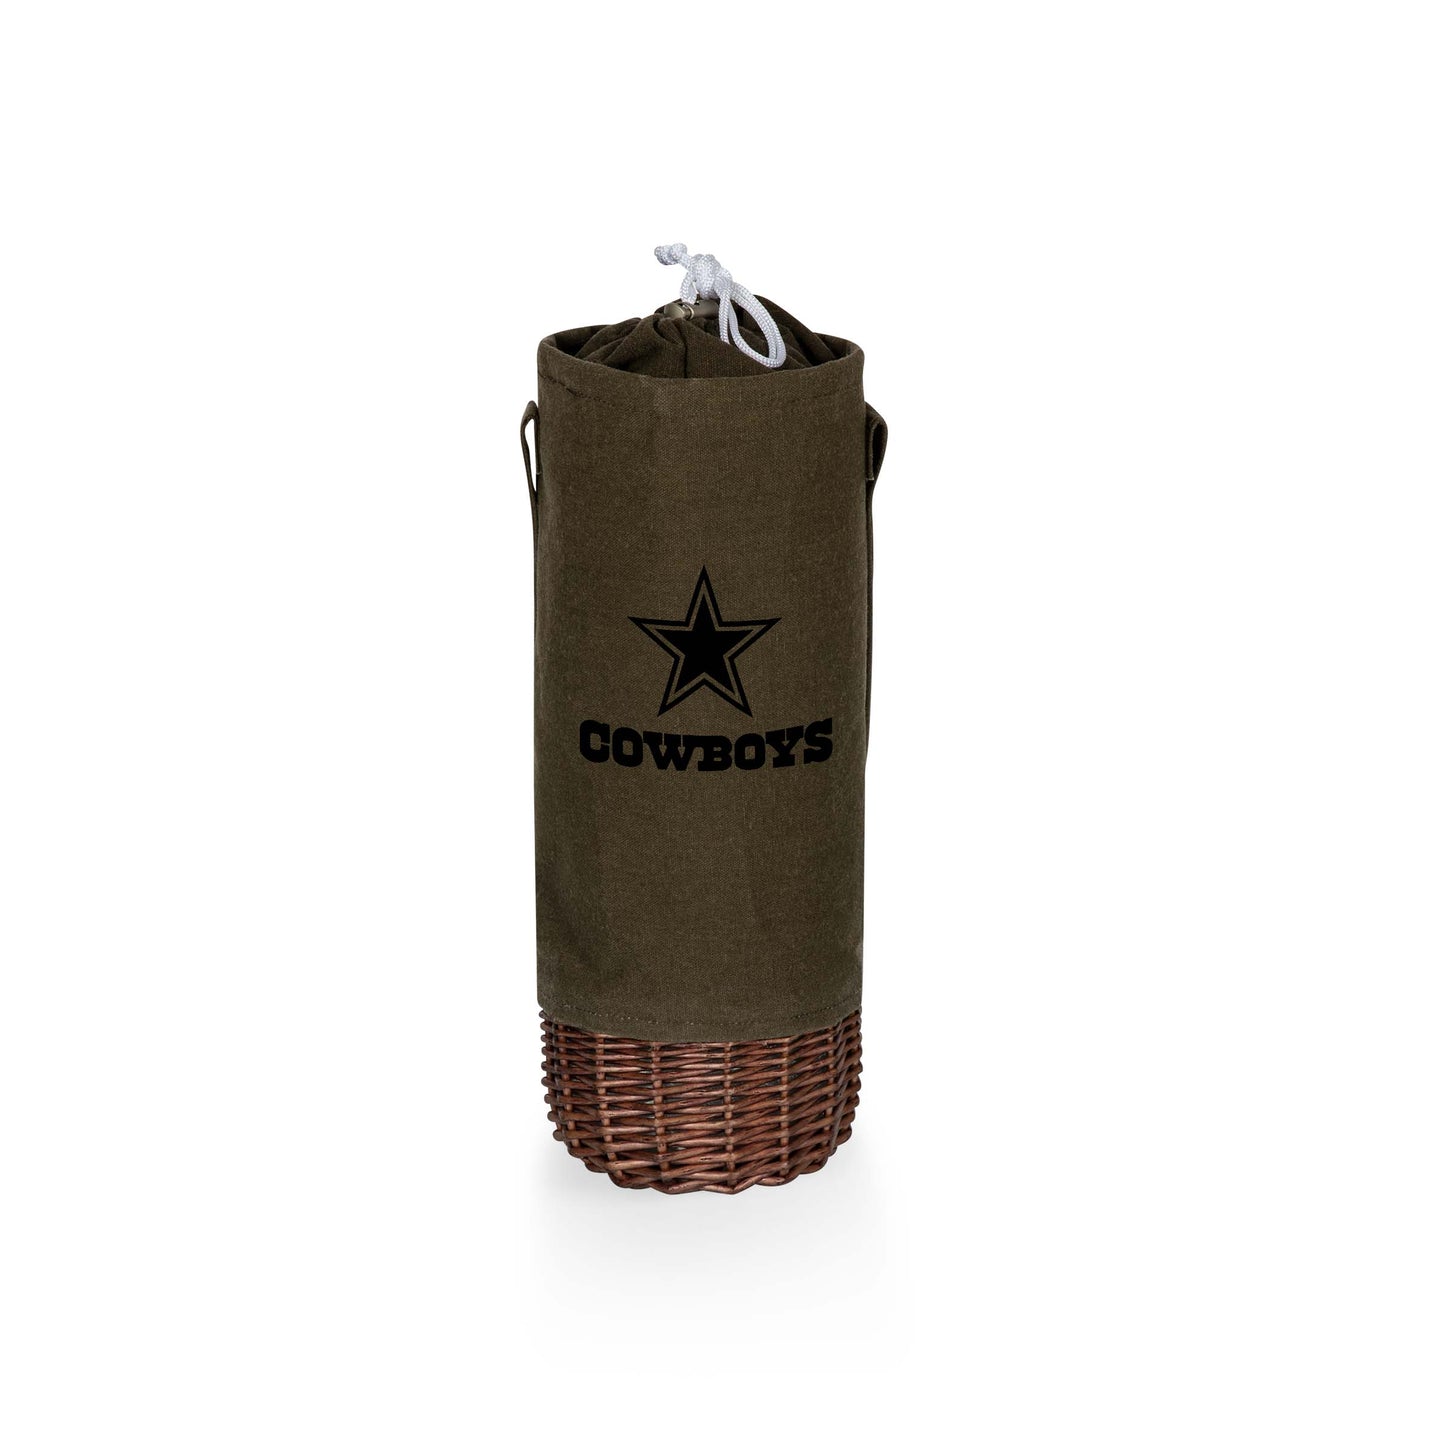 Dallas Cowboys - Malbec Insulated Canvas and Willow Wine Bottle Basket